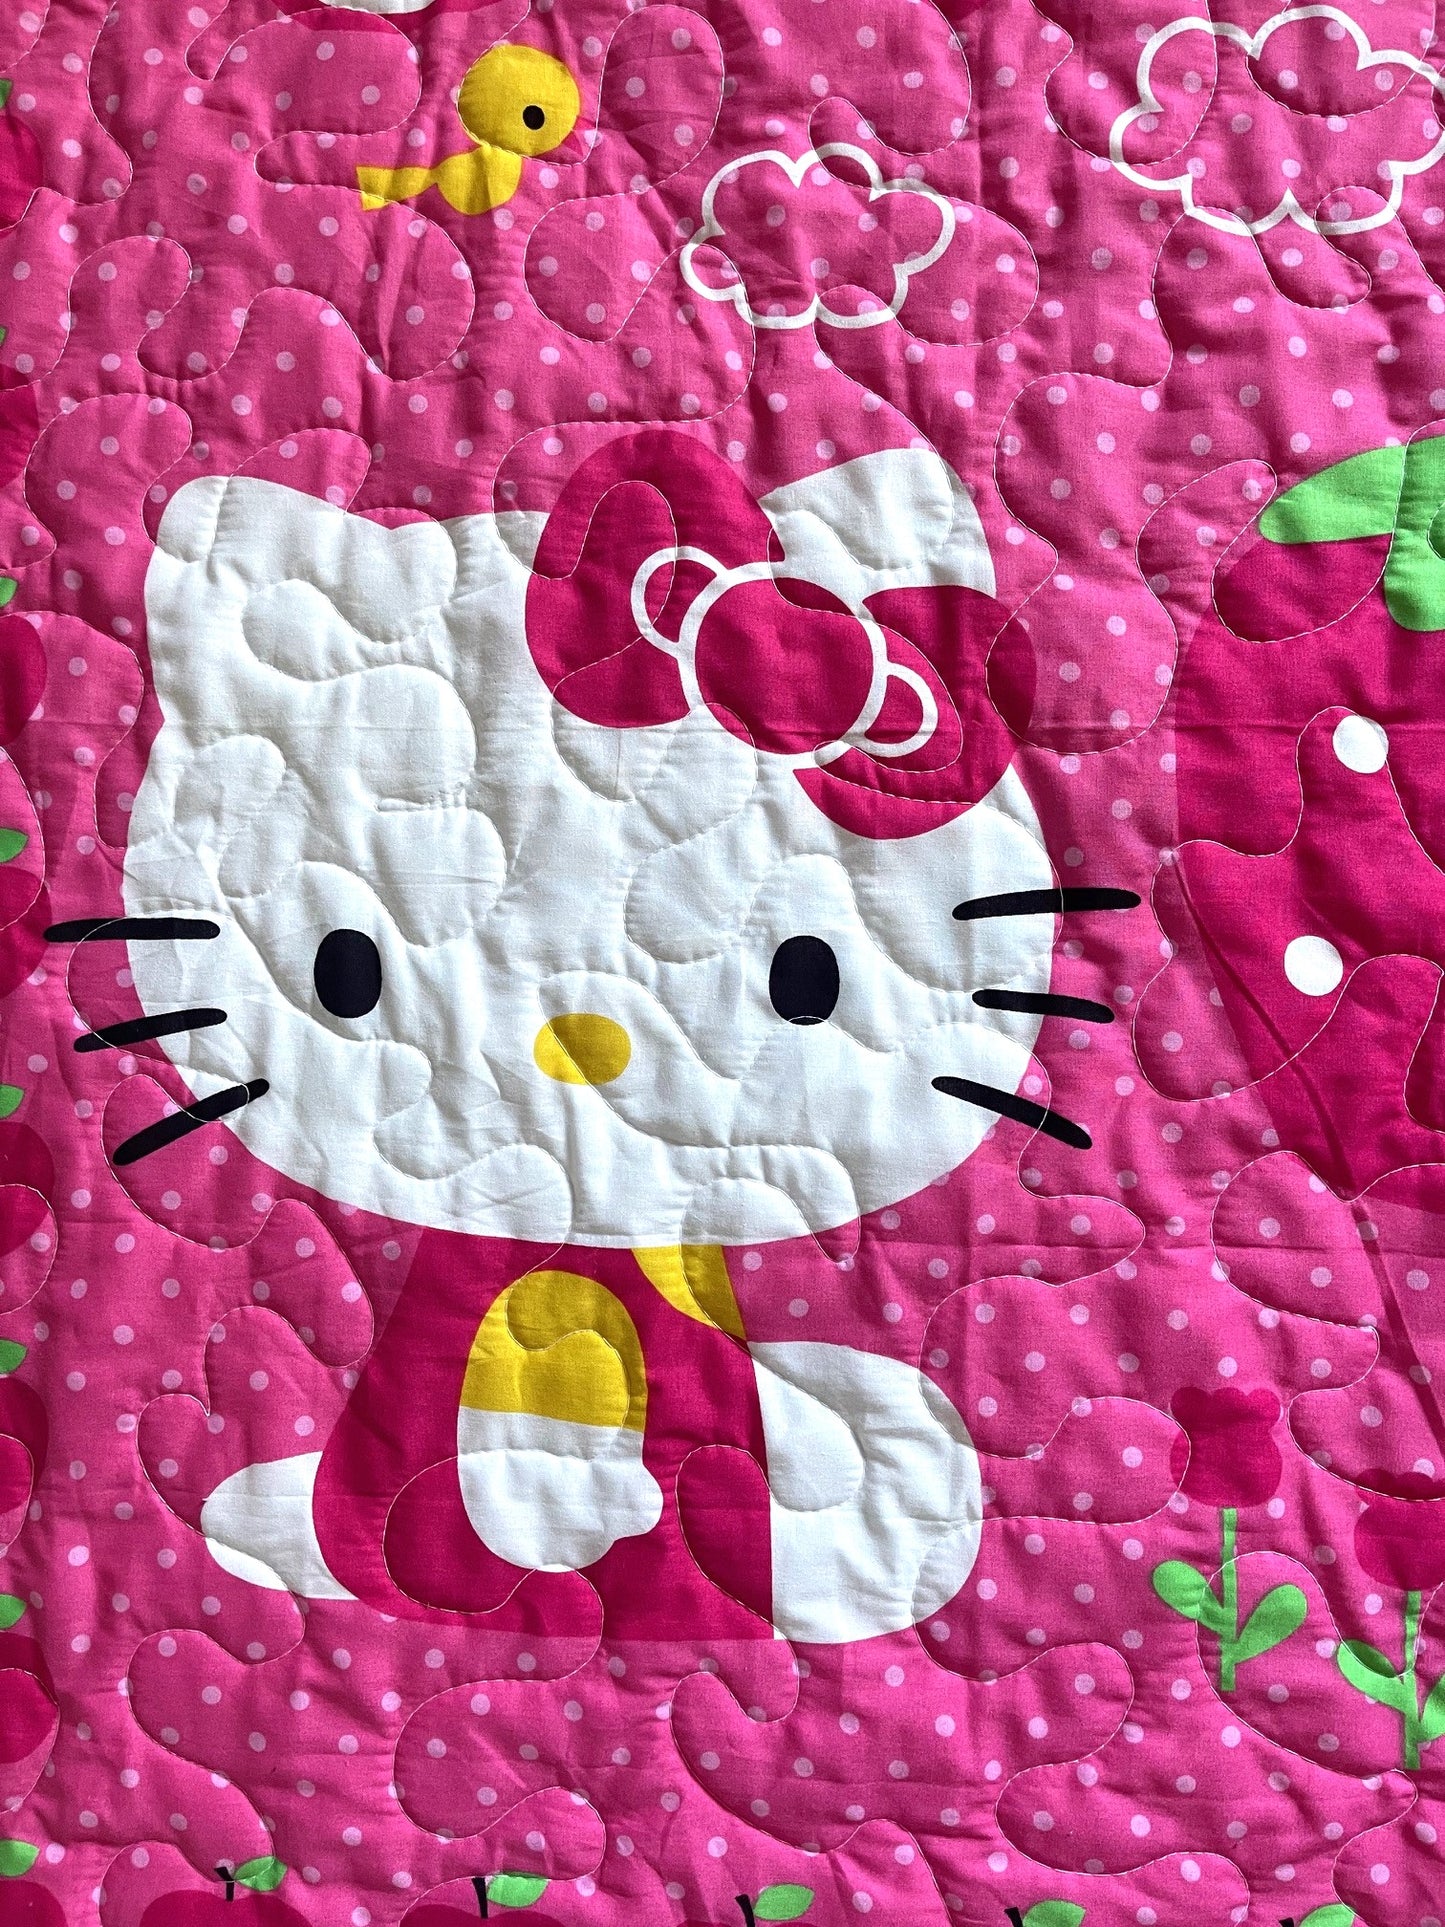 HELLO KITTY STRAWBERRY & APPLES INSPIRED QUILTED BLANKET